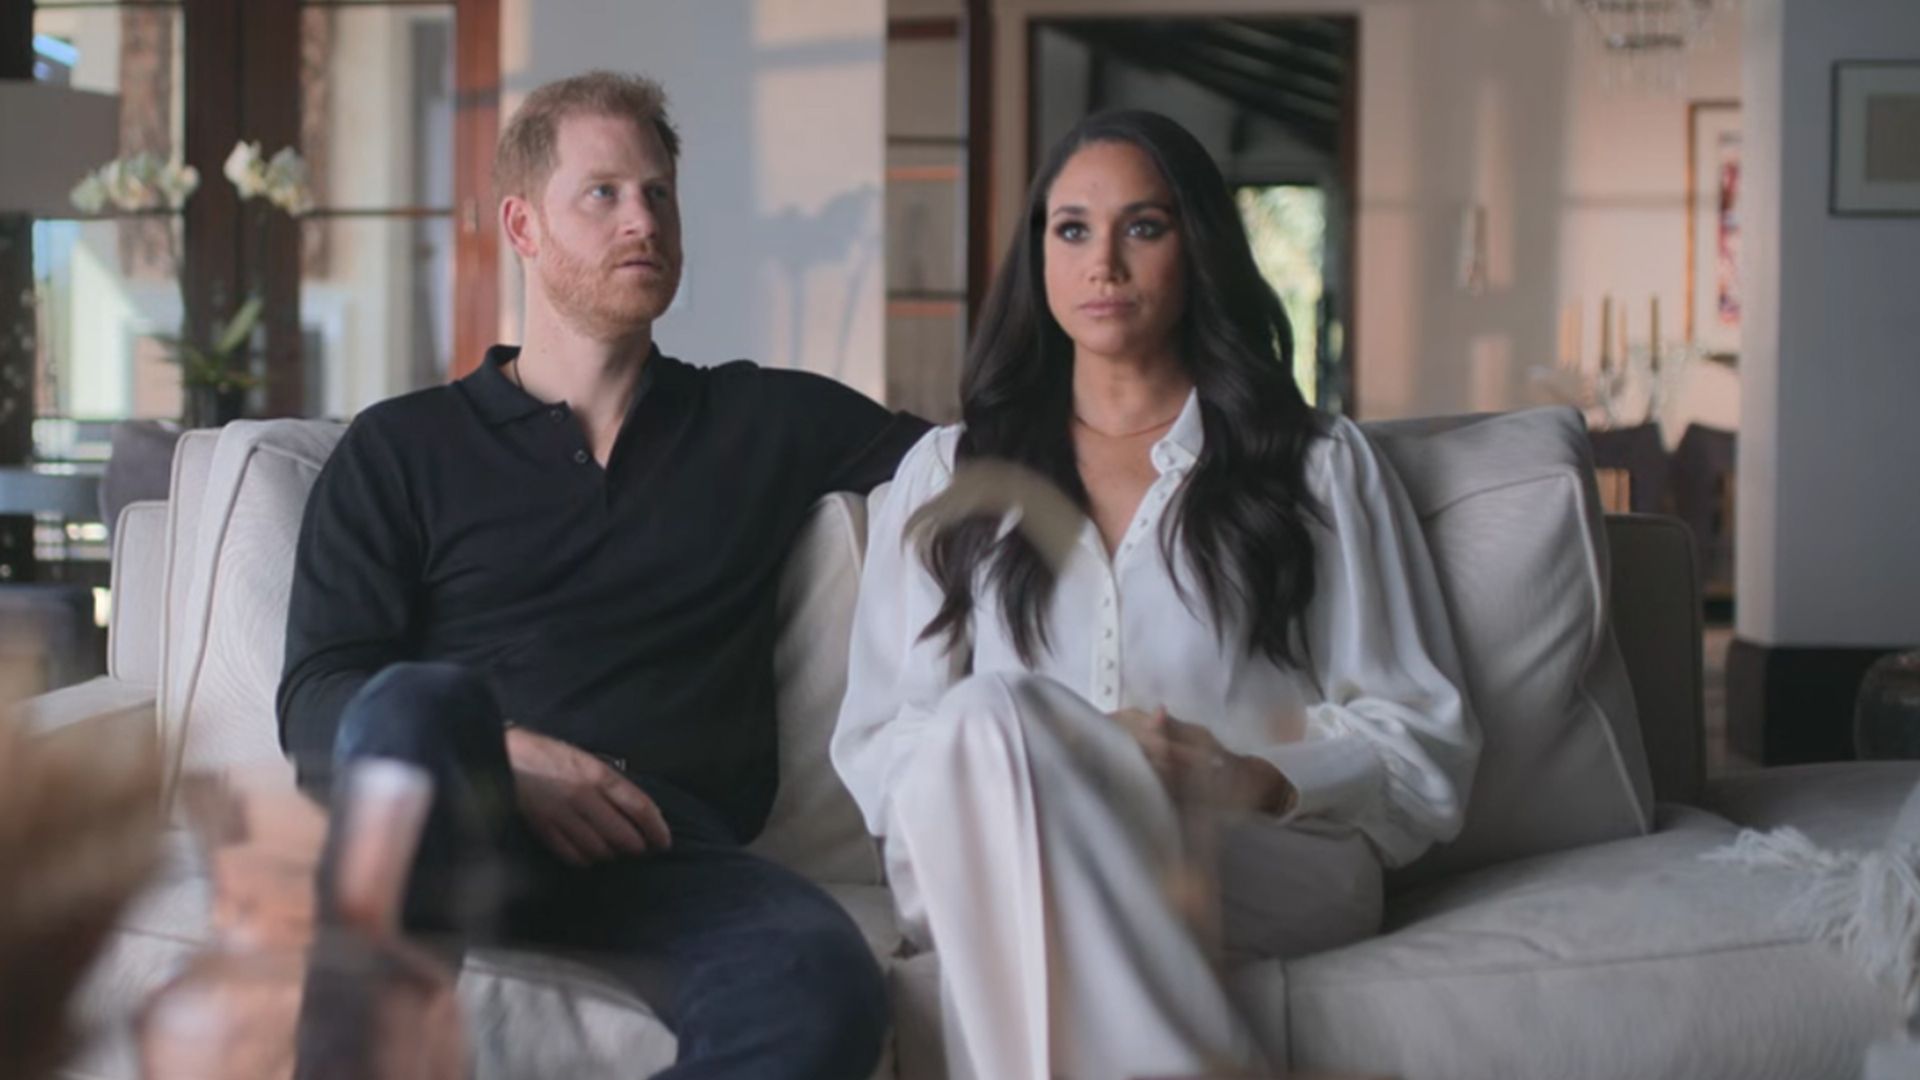 Watch: the five most talked-about clips from Harry & Meghan episode one